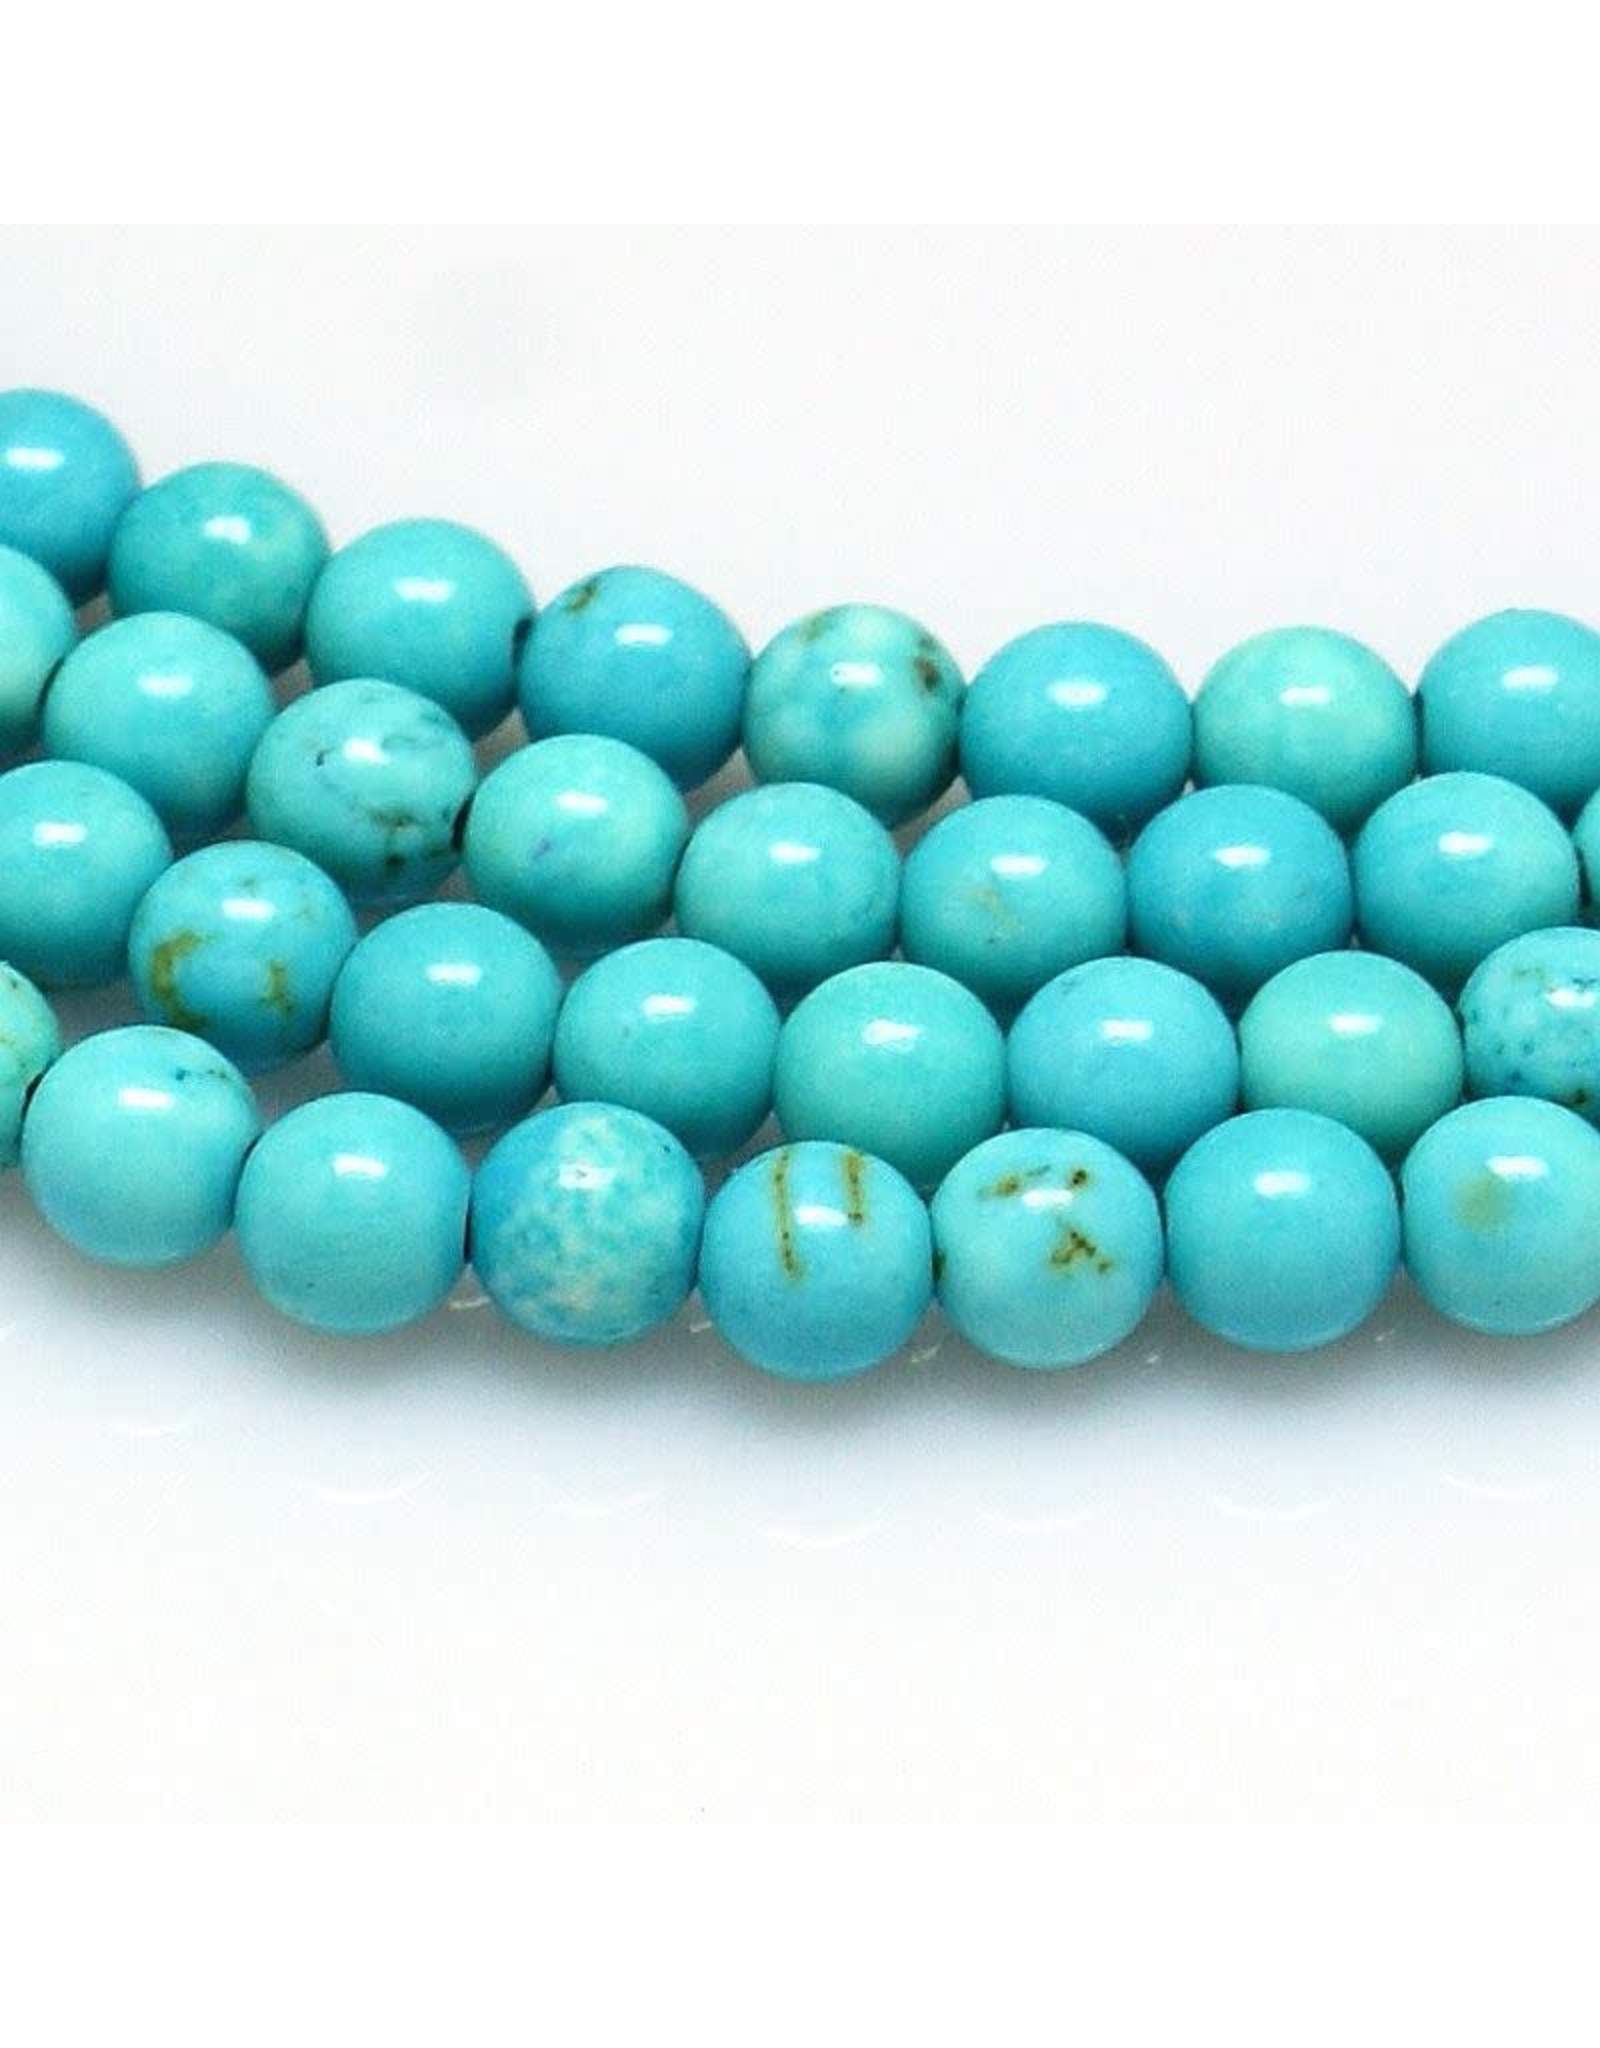 Howlite Dyed 10mm Blue  15” Strand Approx x36